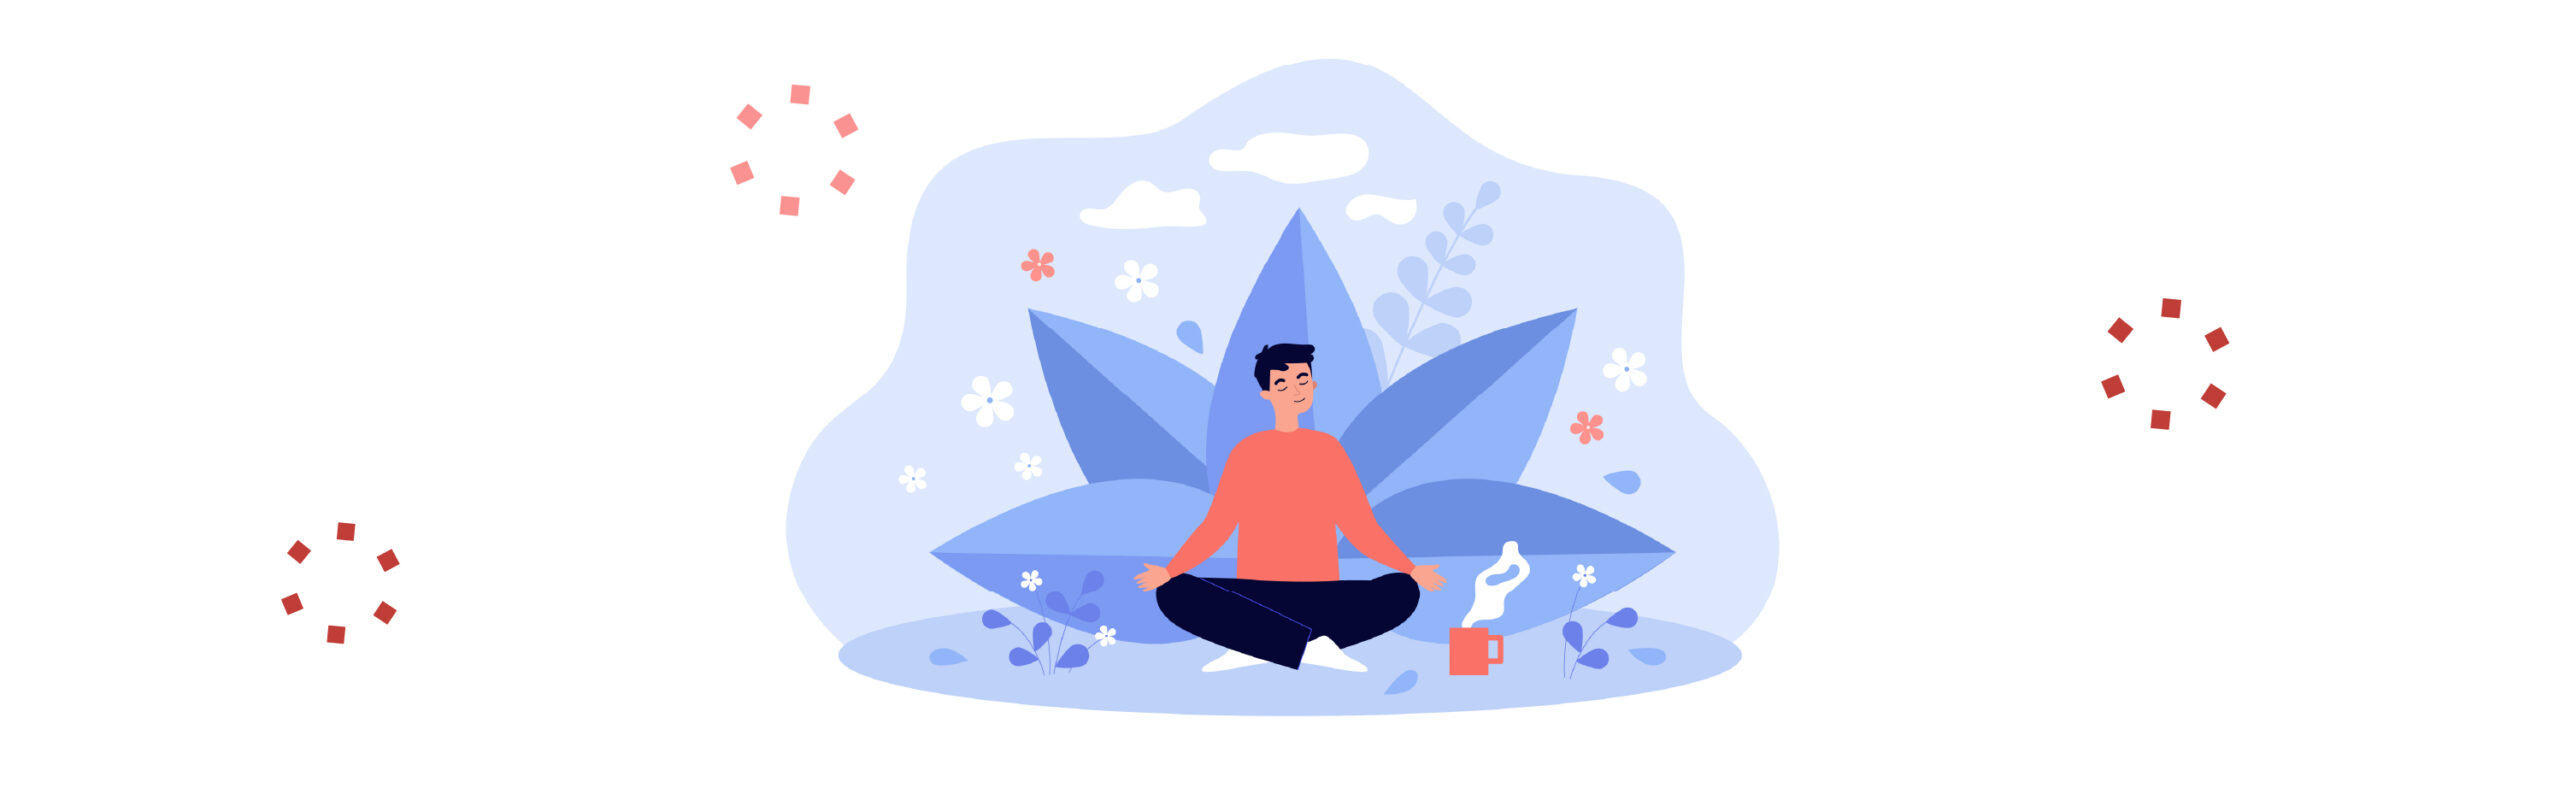 graphic of person meditating